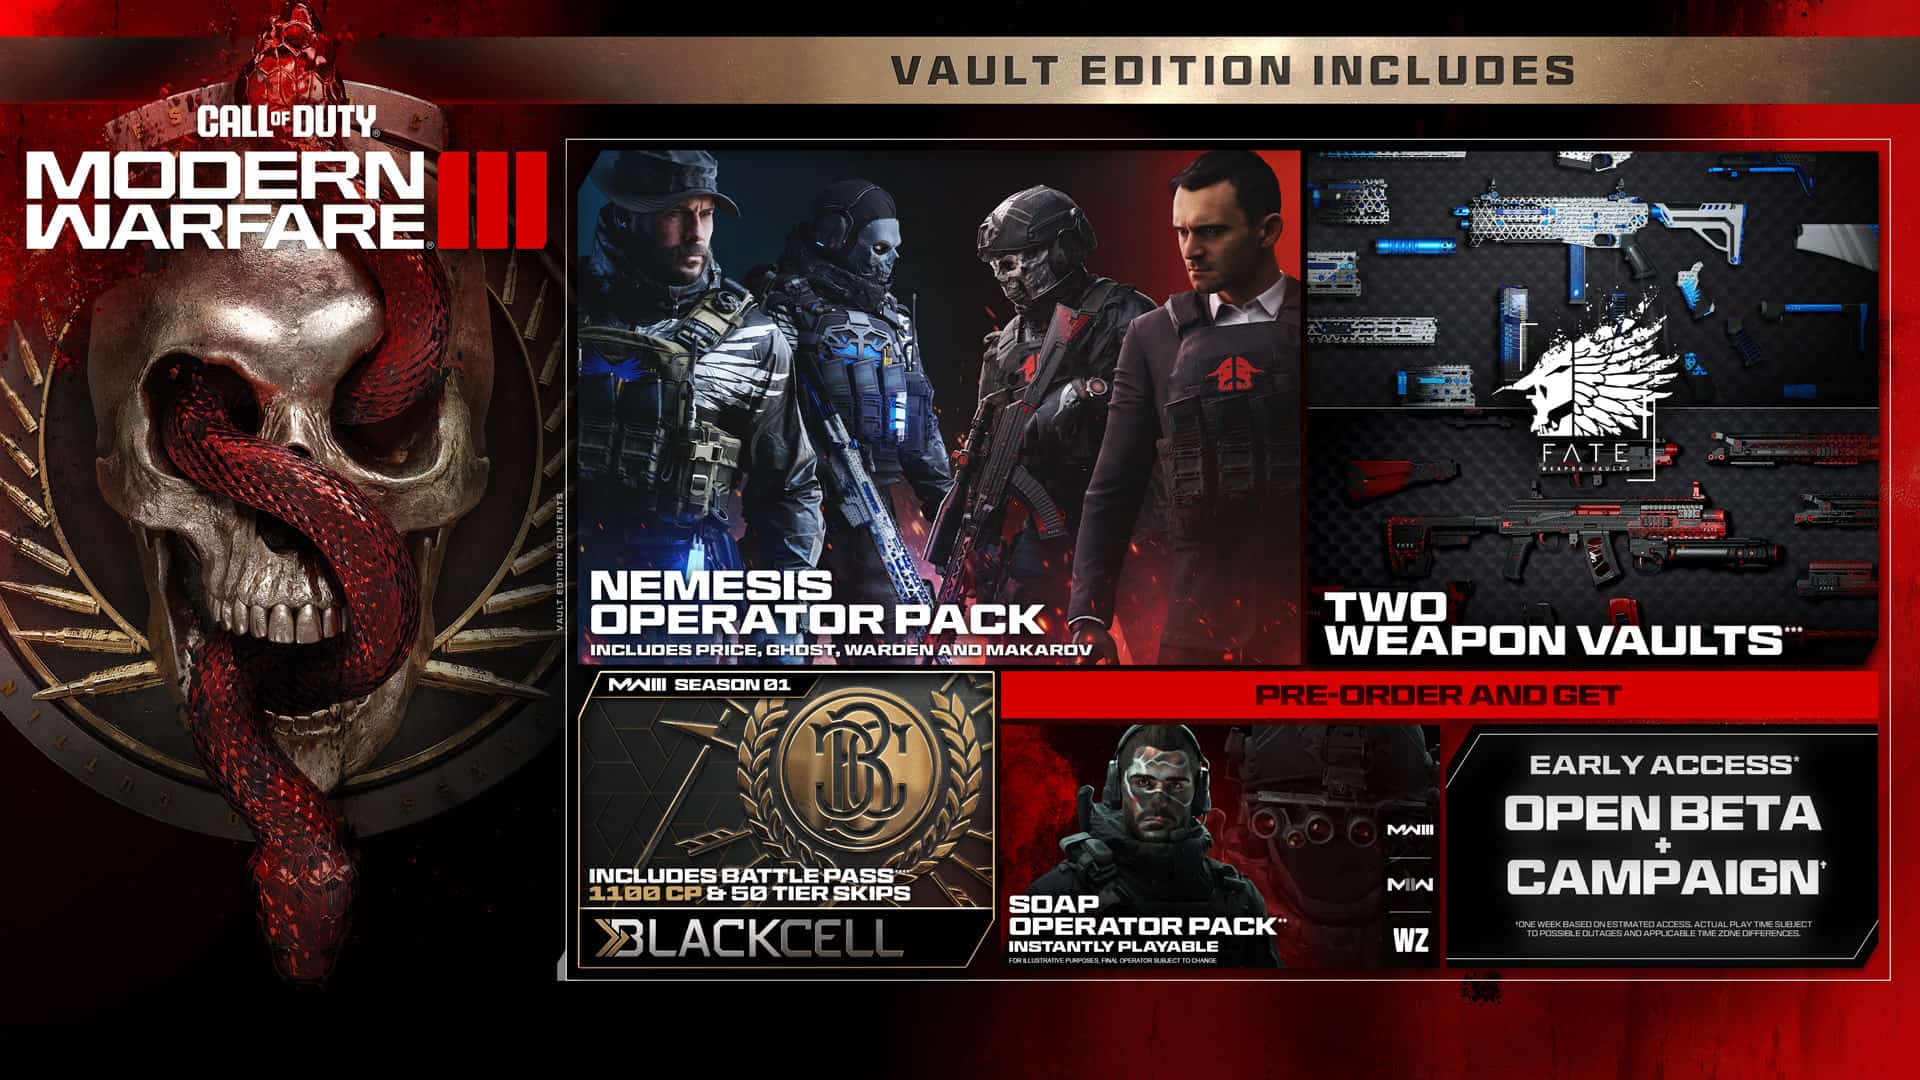 Here's all the content you can get from the Vault Edition of MW3. Image from Activision.